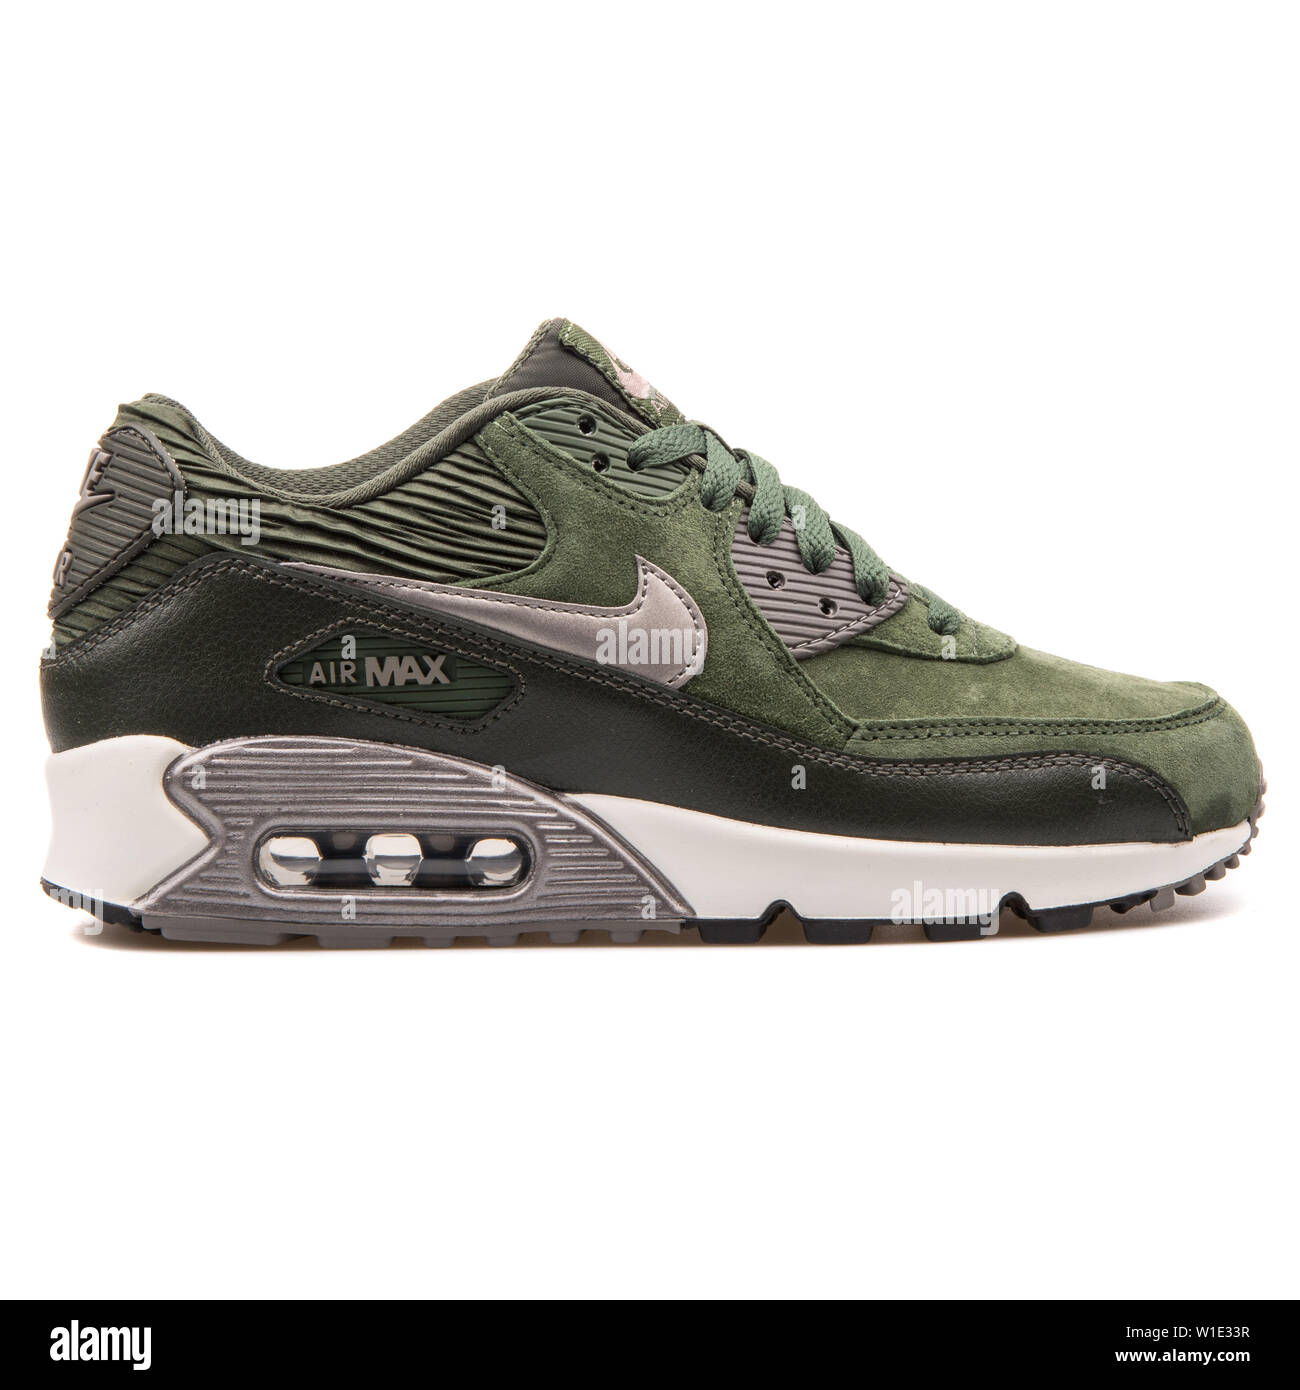 VIENNA, AUSTRIA - AUGUST 25, 2017: Nike Air Max 90 Leather green, black and  metallic silver sneaker on white background Stock Photo - Alamy